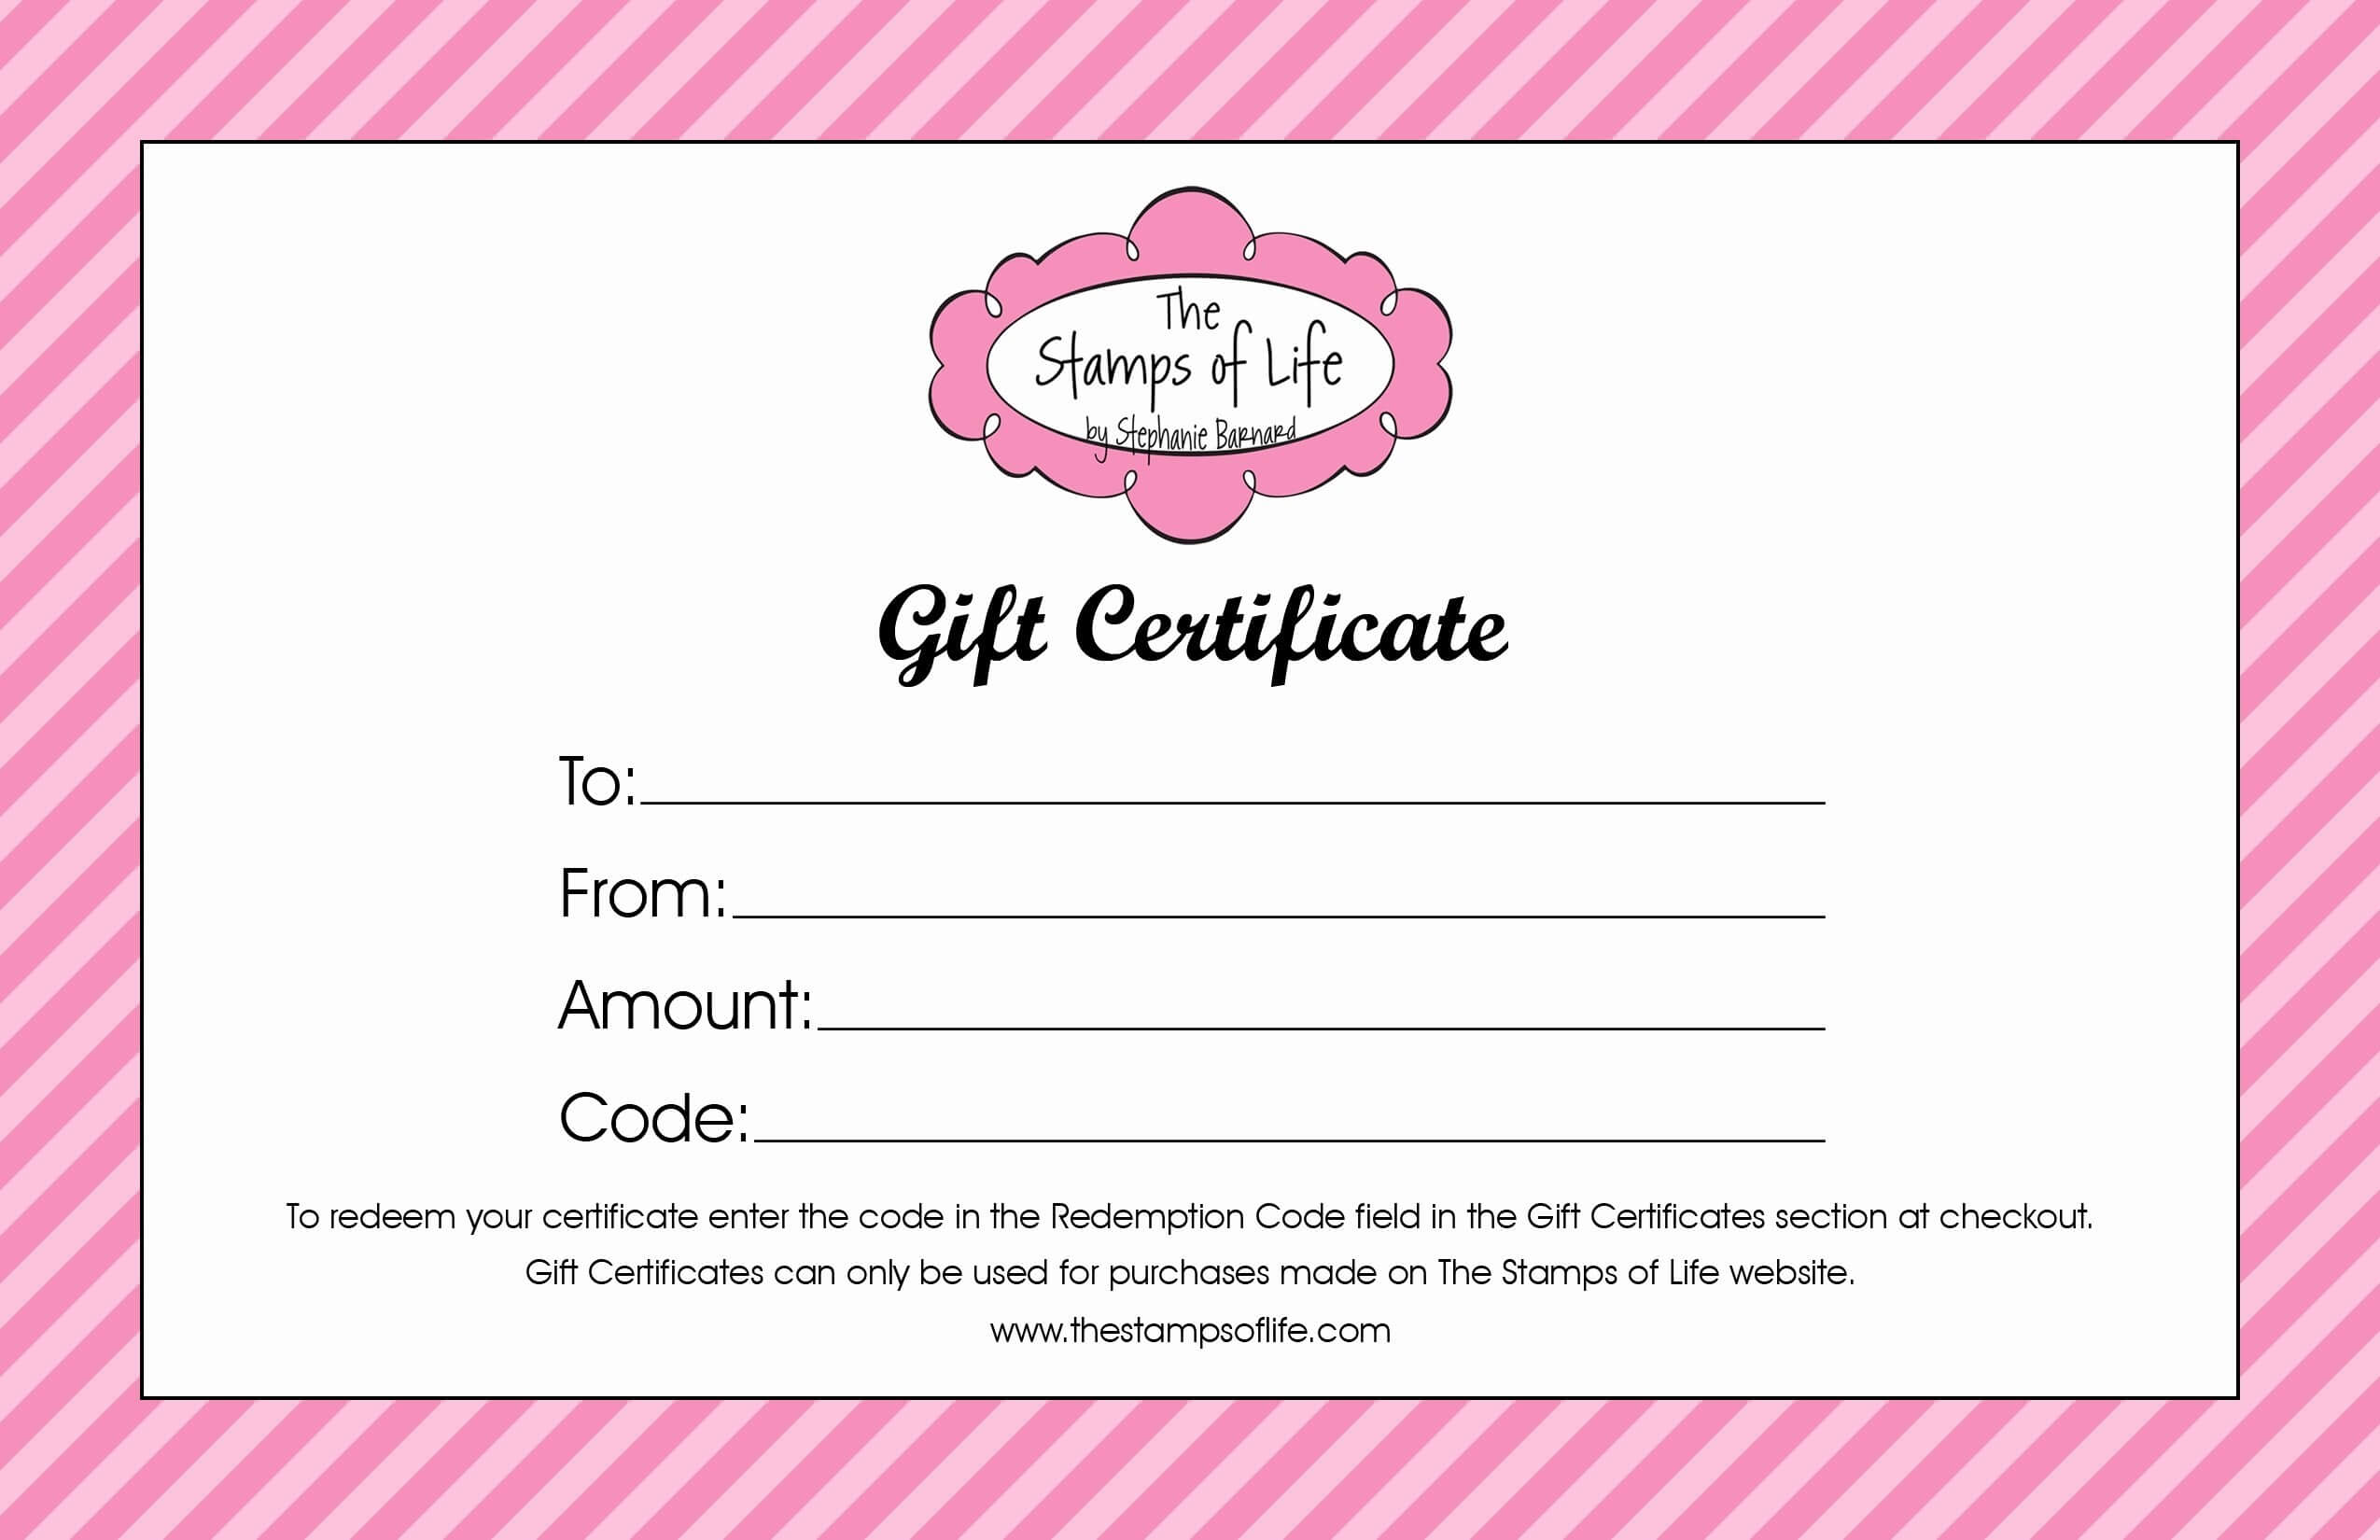 Shopping Spree Certificate Template Printable Gift Free With This Certificate Entitles The Bearer To Template